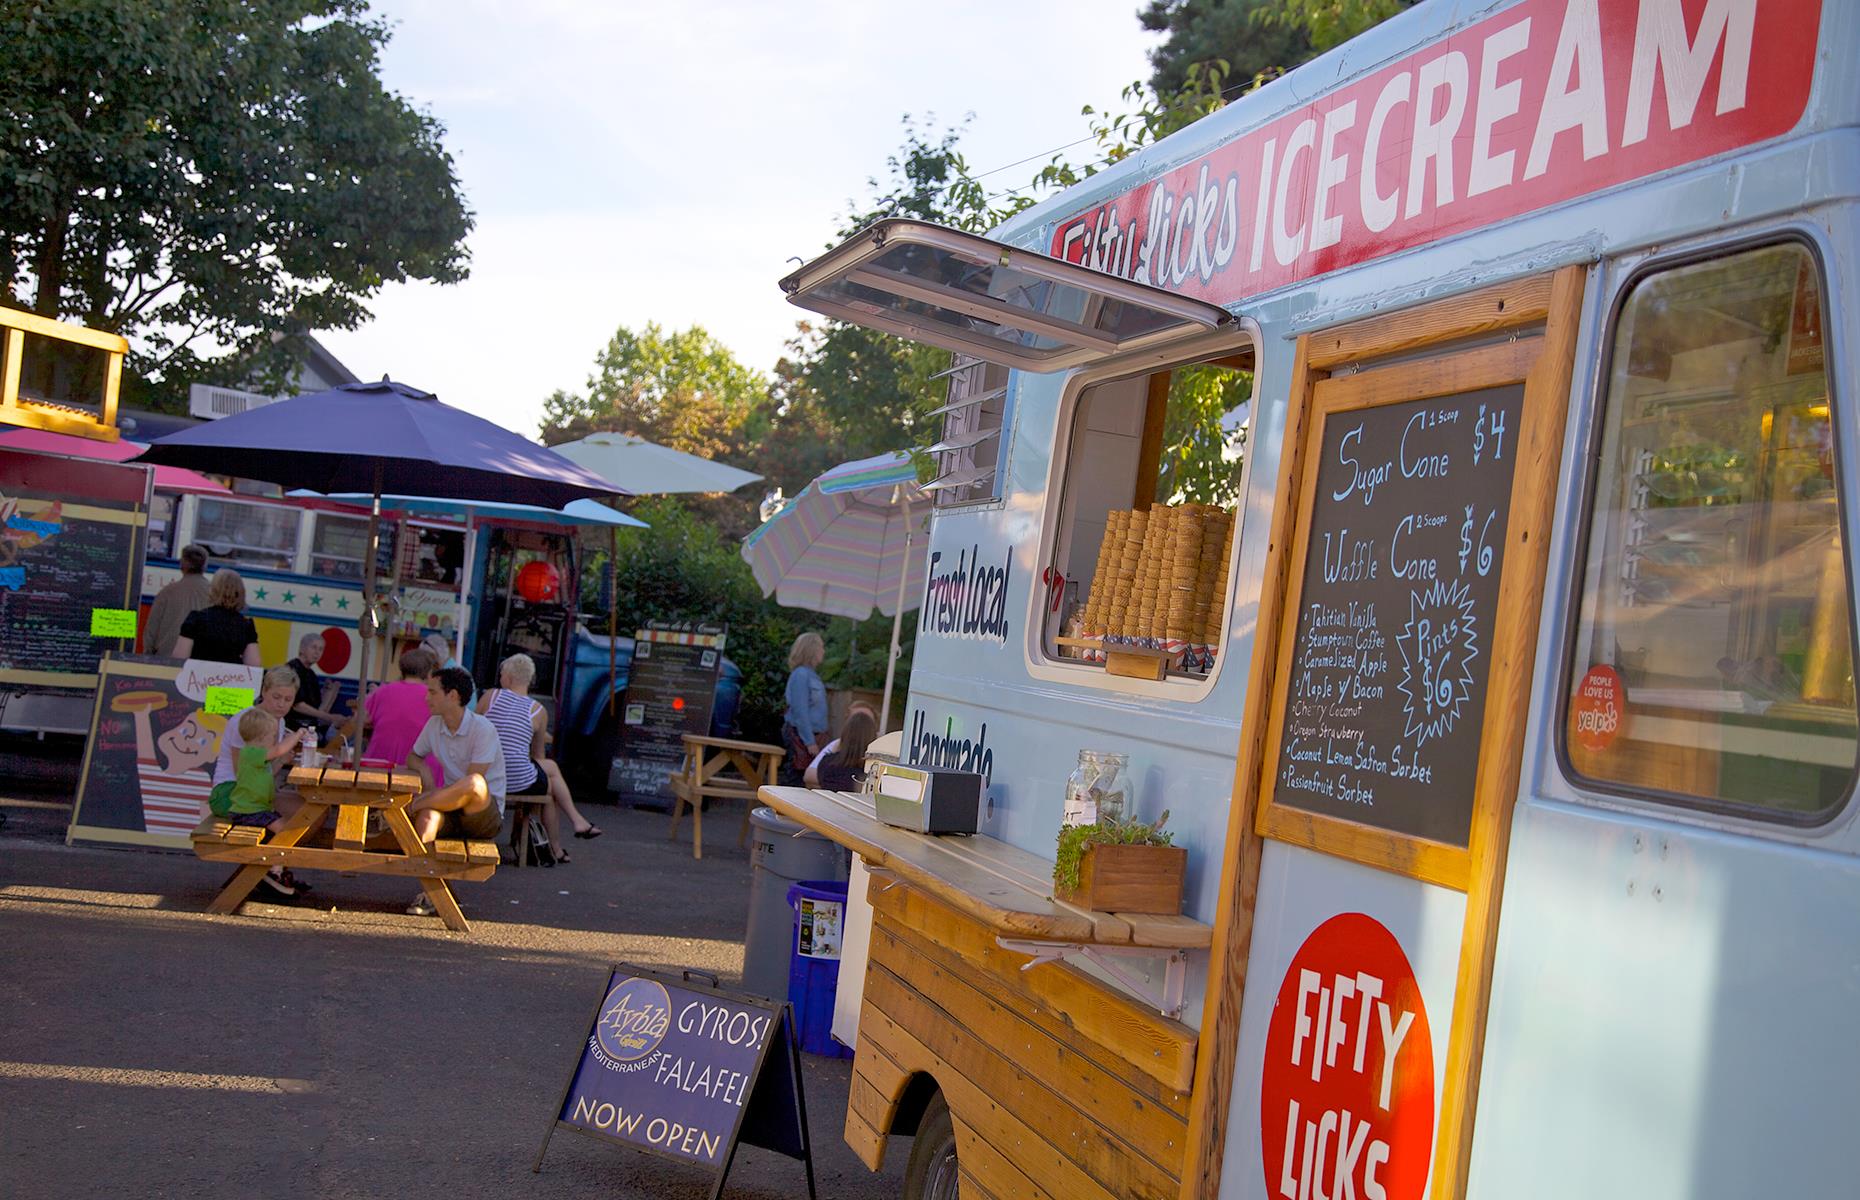 <p>Portland is awash with street food trucks and <a href="https://lostplate.com/portland-food-tours/">this tour</a> shows off the best of the city's roving vendors. You'll visit up to seven food carts (including a popular food-cart 'pod'), plus a buzzing food hall and a brewery. Expect everything from barbecue plates to sweet pies and ice cream. </p>